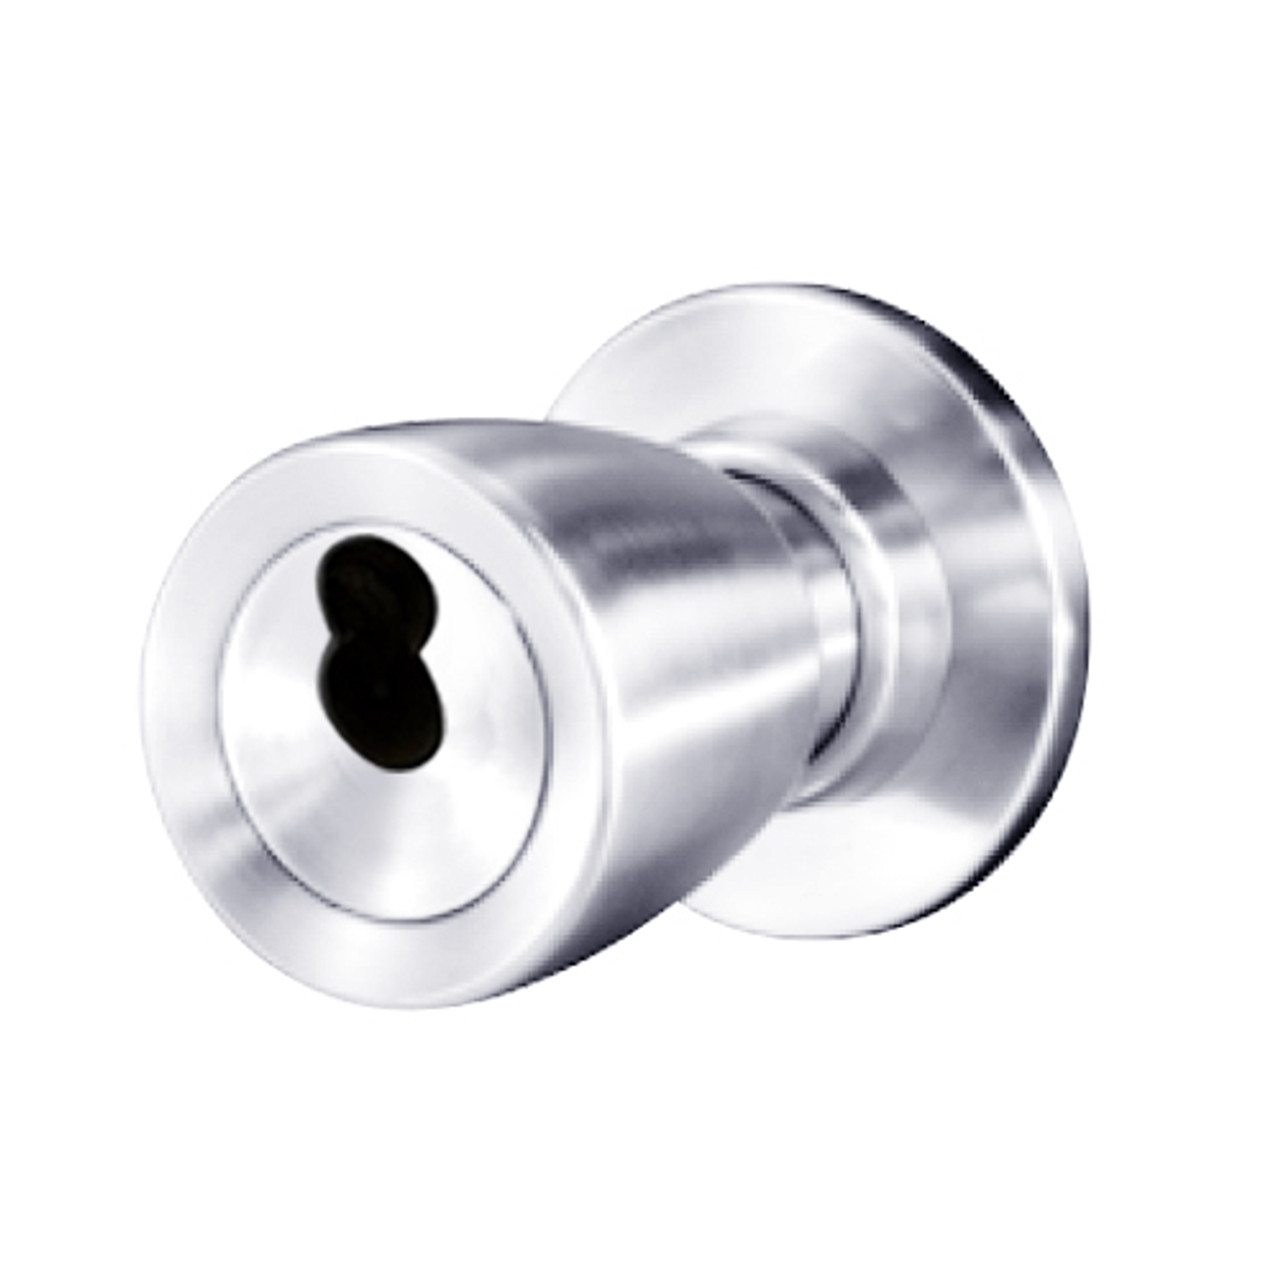 8K57YD6CSTK625 Best 8K Series Exit Heavy Duty Cylindrical Knob Locks with Tulip Style in Bright Chrome